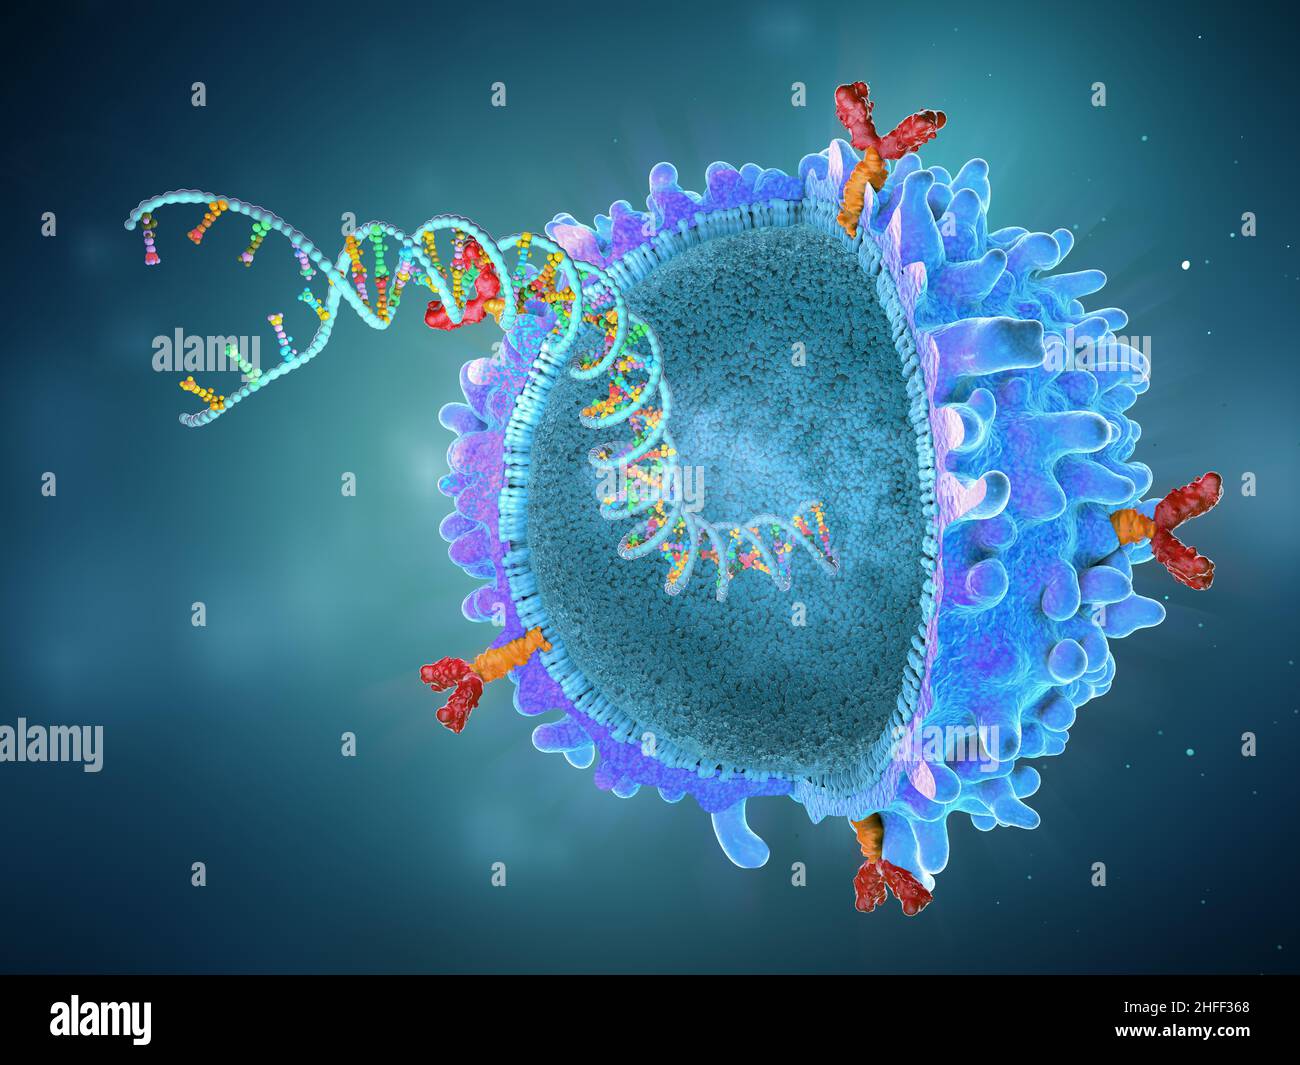 Genetically engineered chimeric antigen receptor immune cell with implanted gene strand - 3d illustration Stock Photo